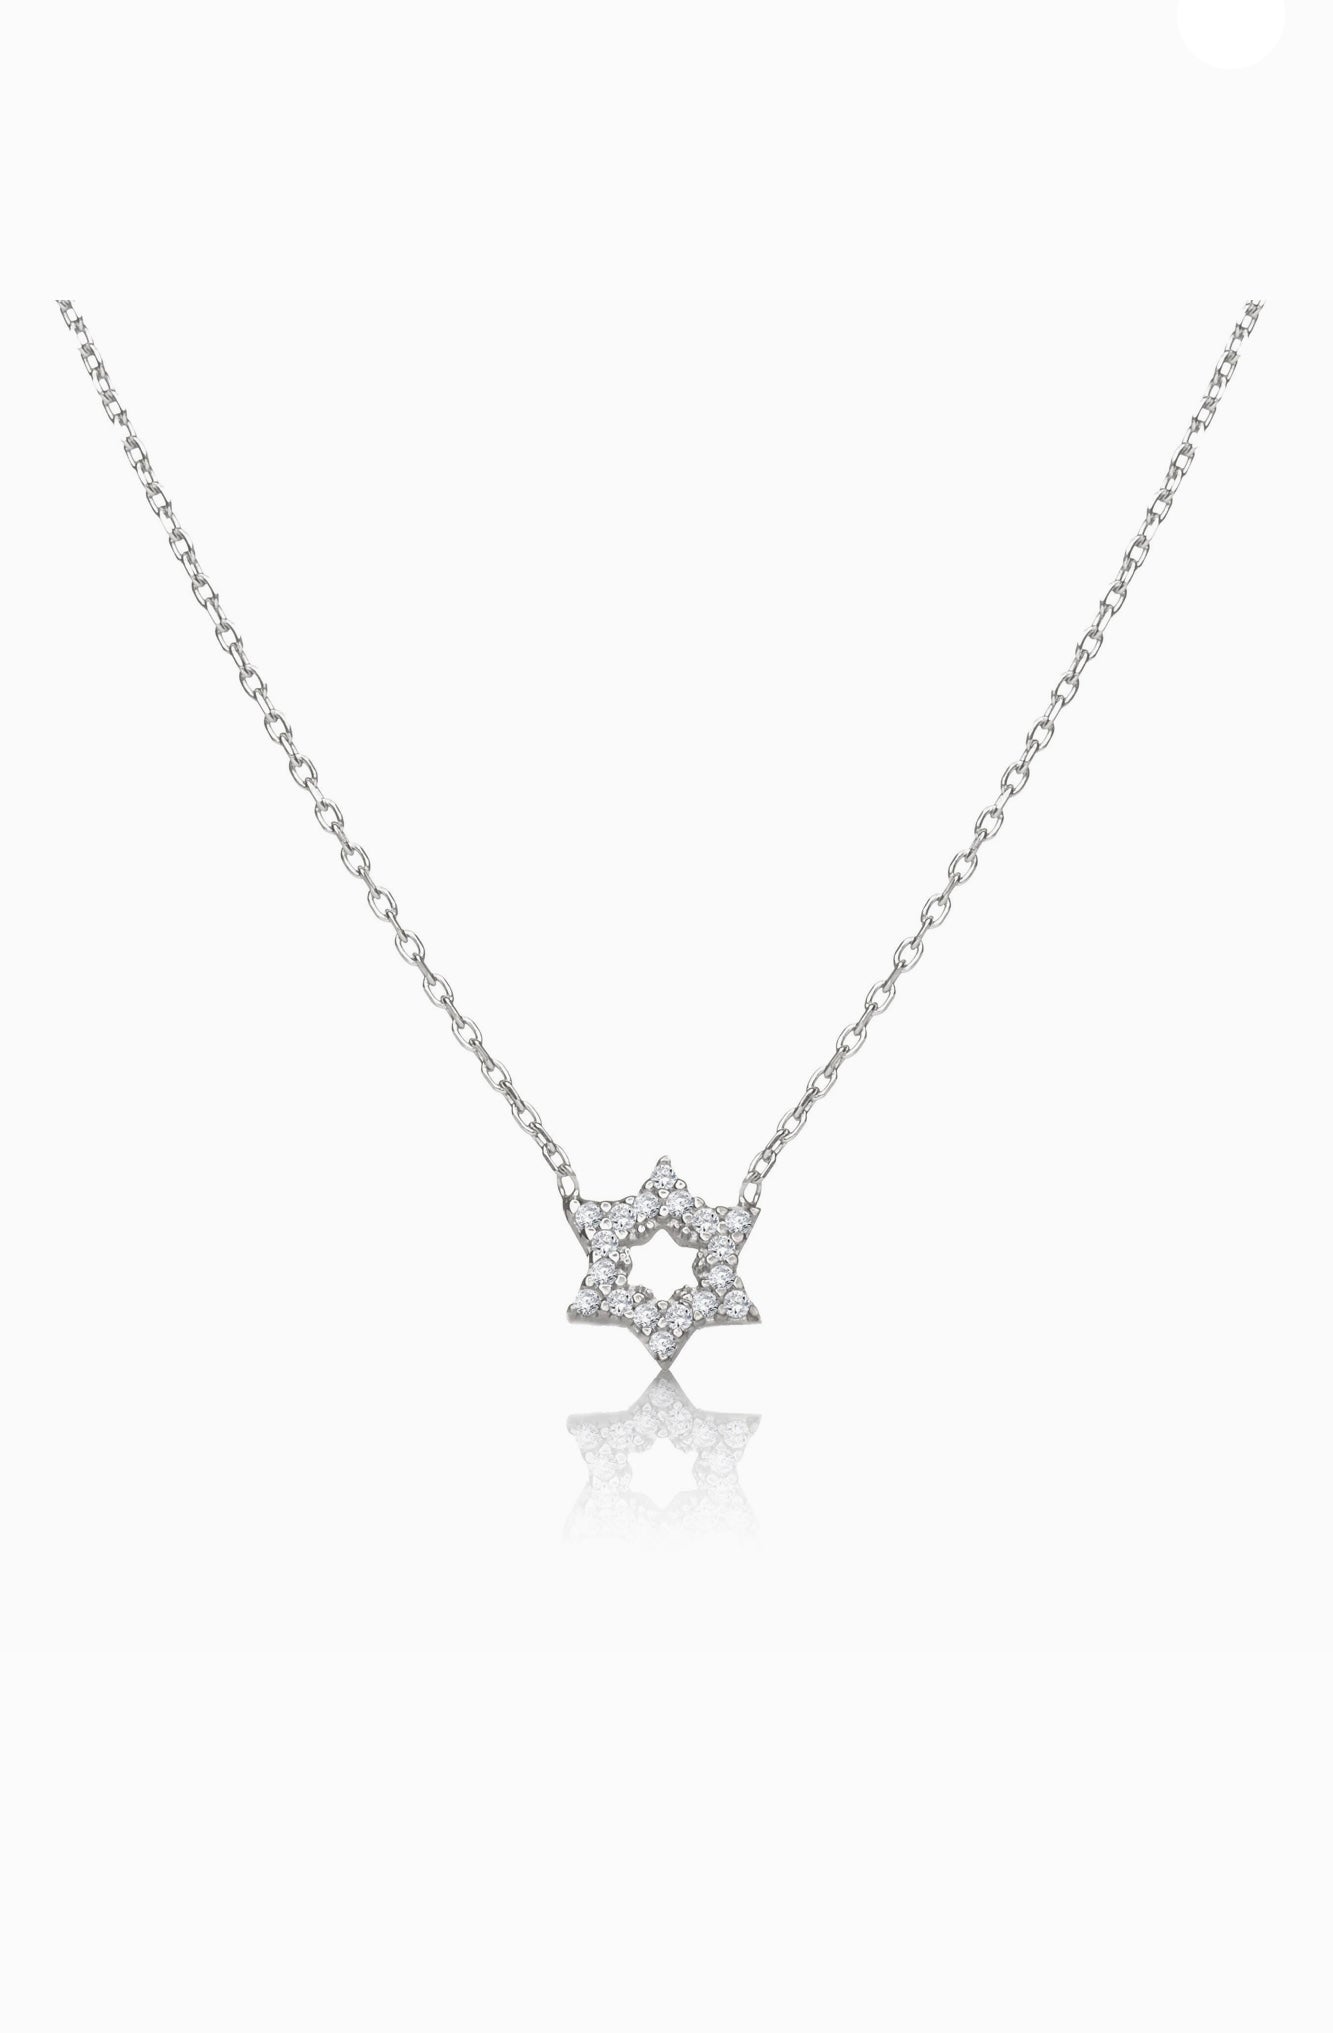 Small Silver Jewish Star Necklace with zircon